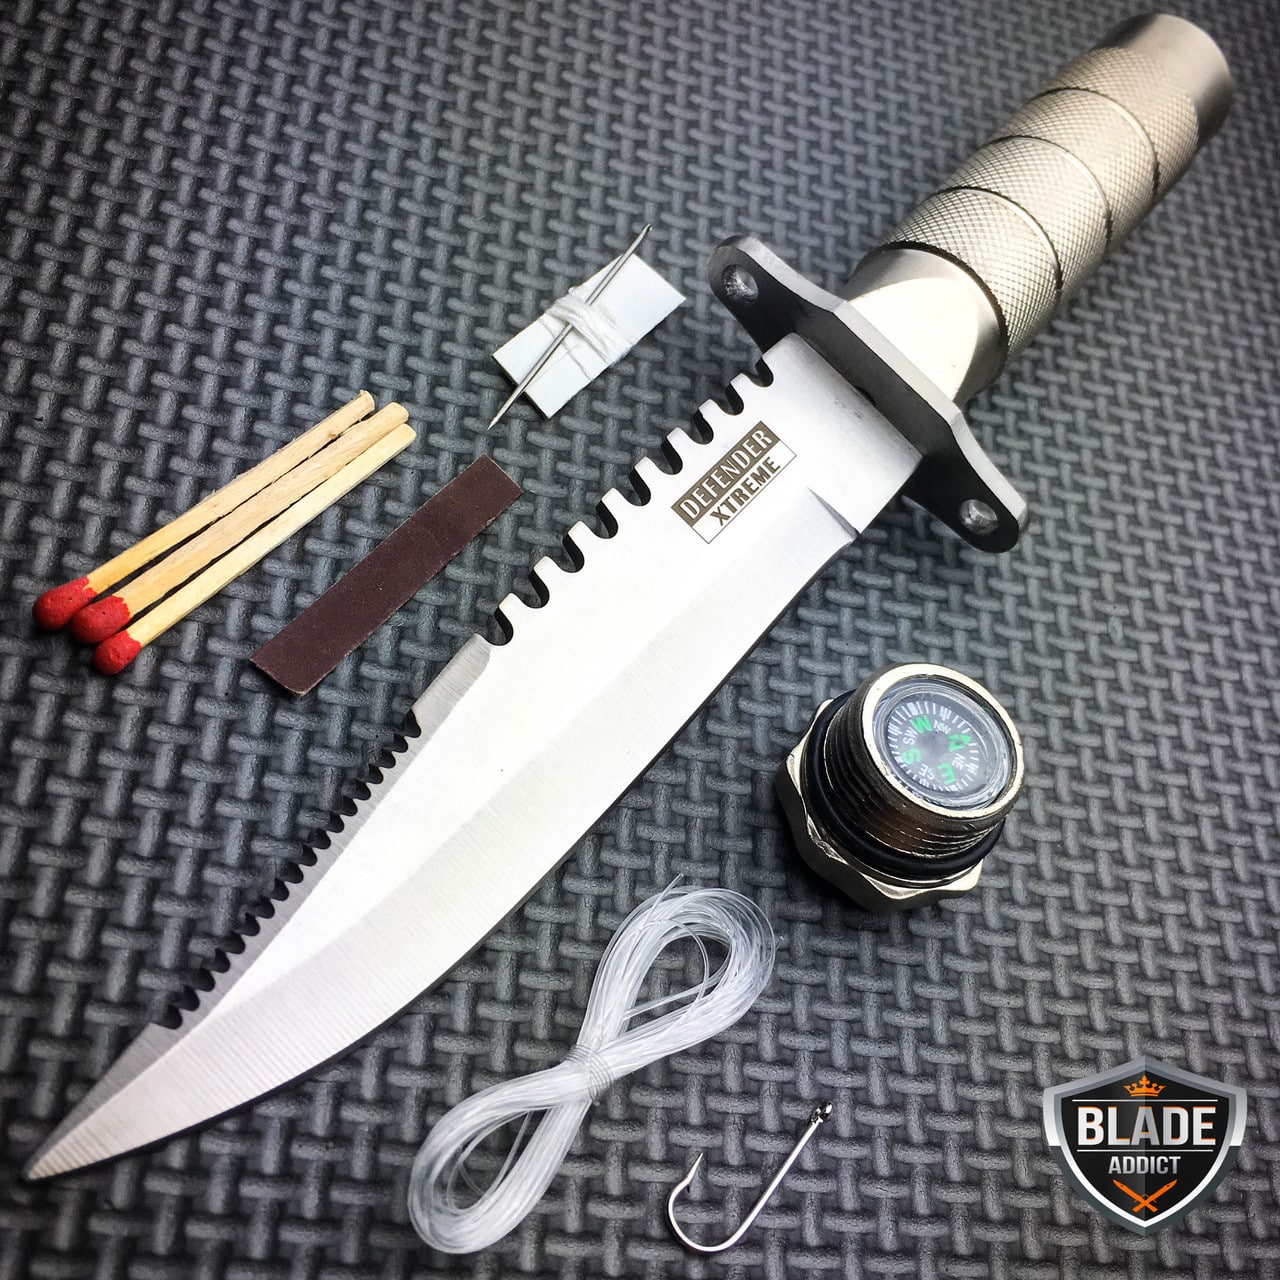 11" Tactical Fishing Hunting CAMPING Knife FIXED BLADE Bowie + Survival Kit NEW